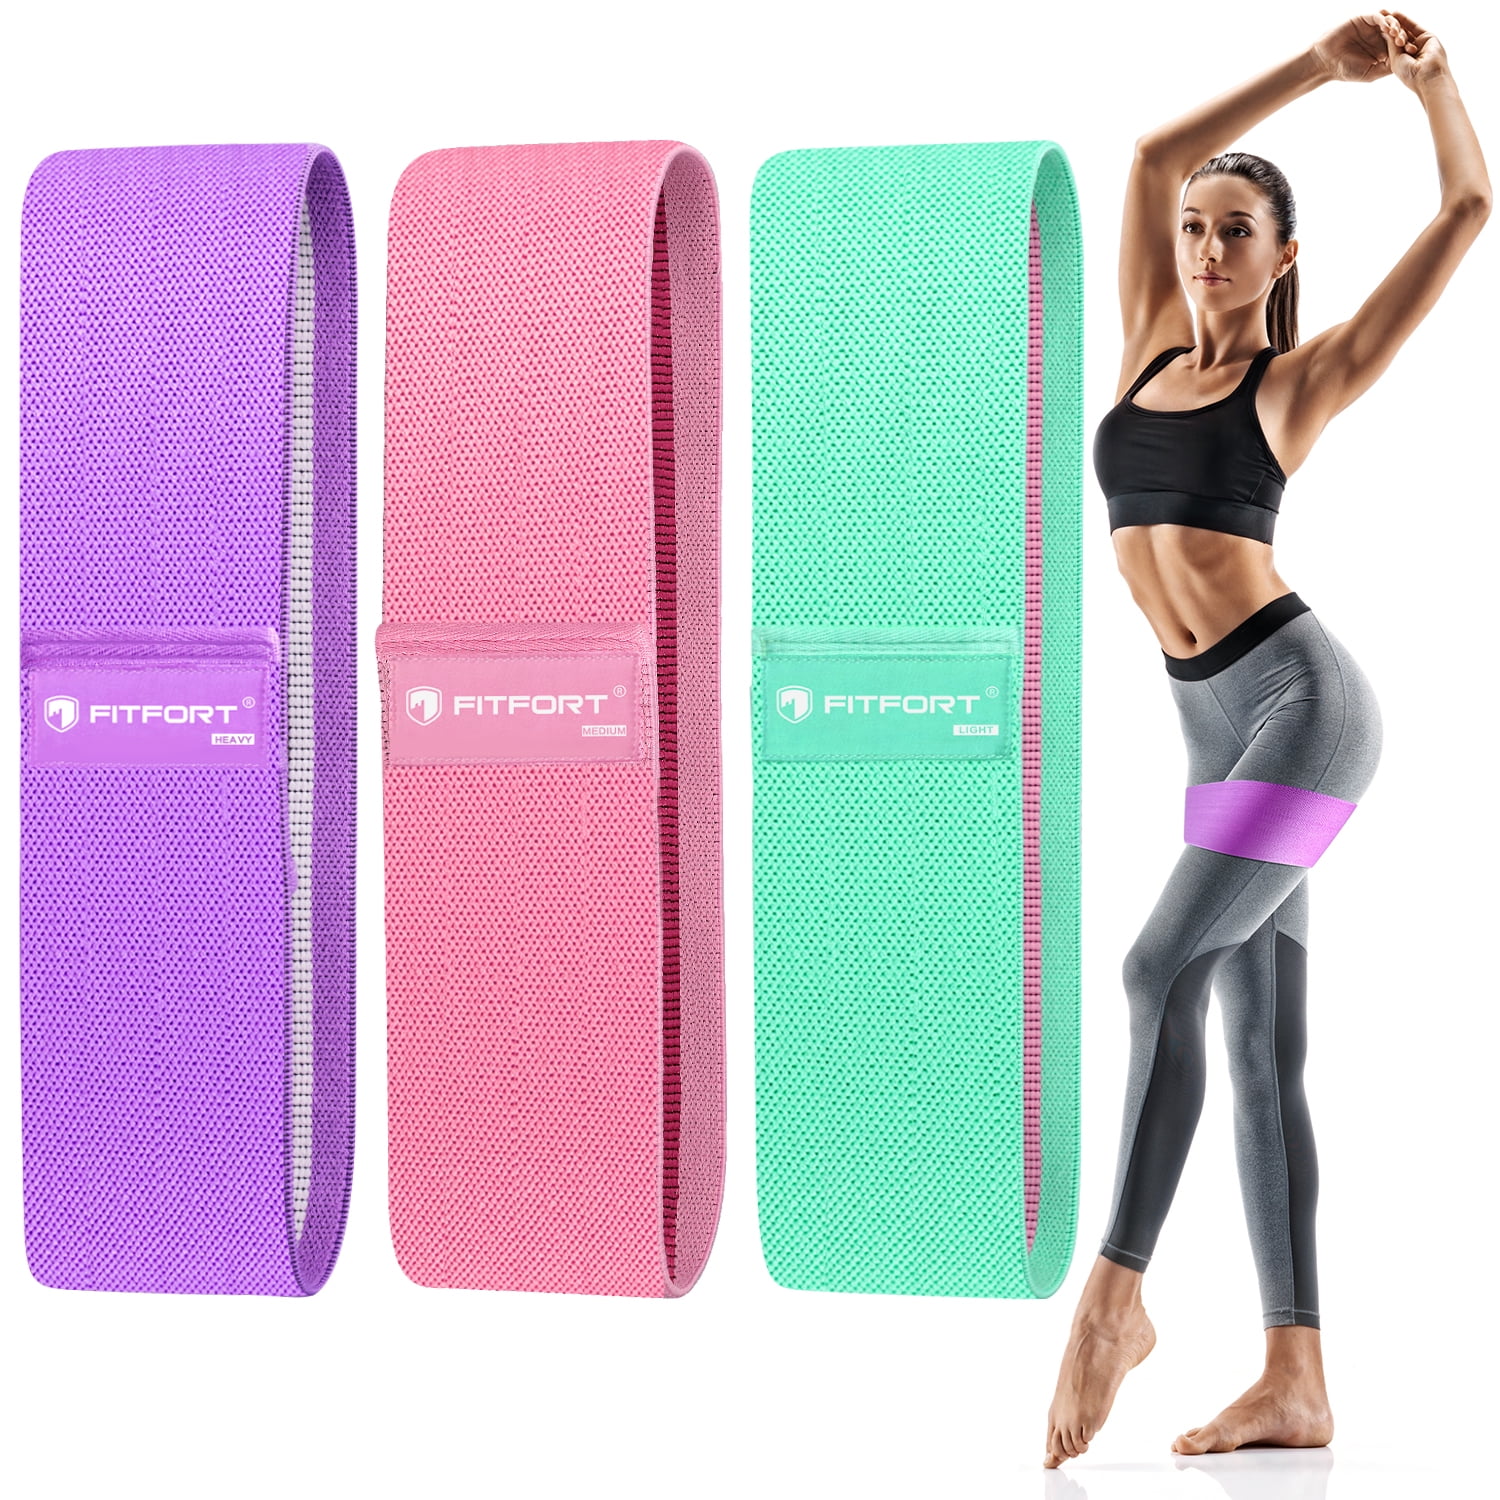 Resistance Exercise Bands for Legs and Butt Hip Circle Loop Exercise Bands Set for Hip Training Glutes Legs Yoga,Powerlifting Deadlifts Yoga Pull Up Strength Bands